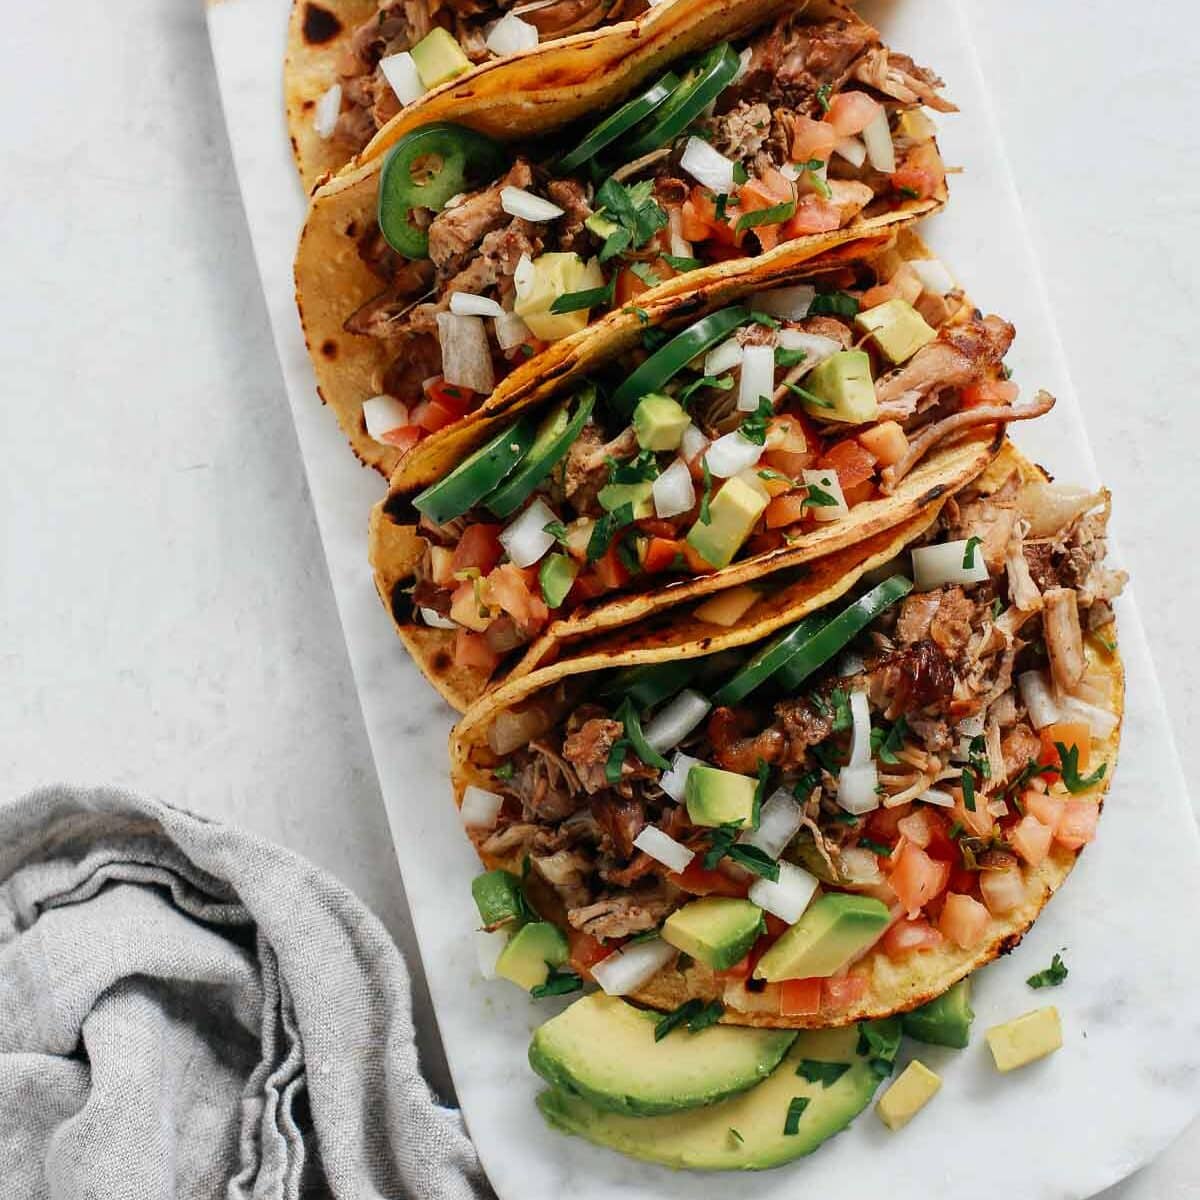 A tray of slow cooker carnitas tacos. One of my favorite date night dinner ideas.